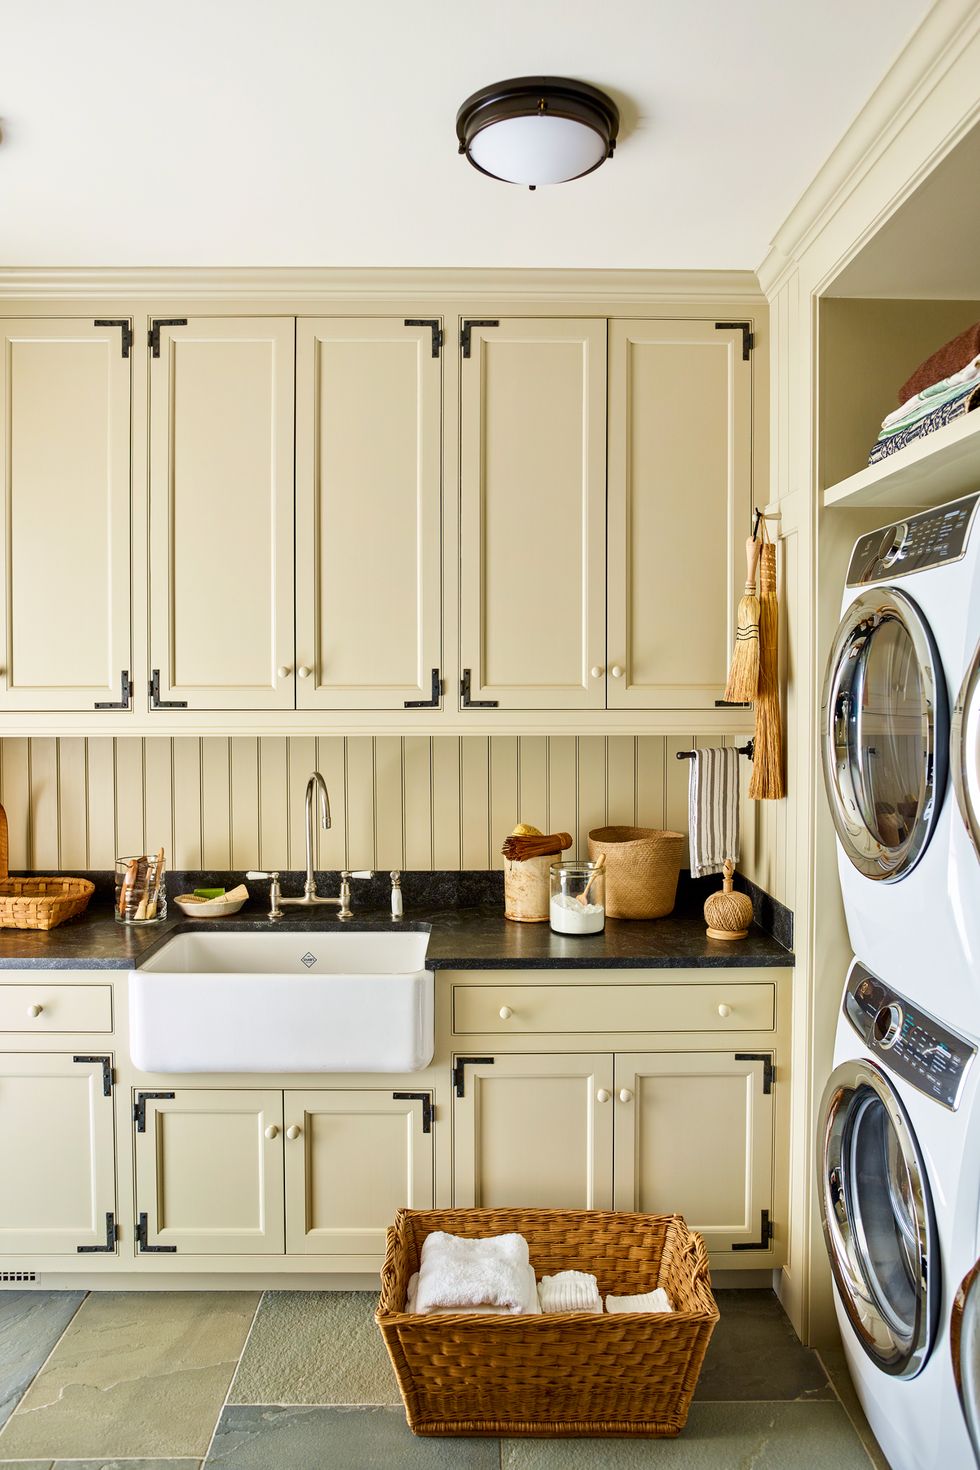 https://hips.hearstapps.com/hmg-prod/images/laundry-room-ideas-schafer-reed-bayview-0761x-copy-1623171741.jpg?crop=0.889xw:1.00xh;0.0221xw,0&resize=980:*